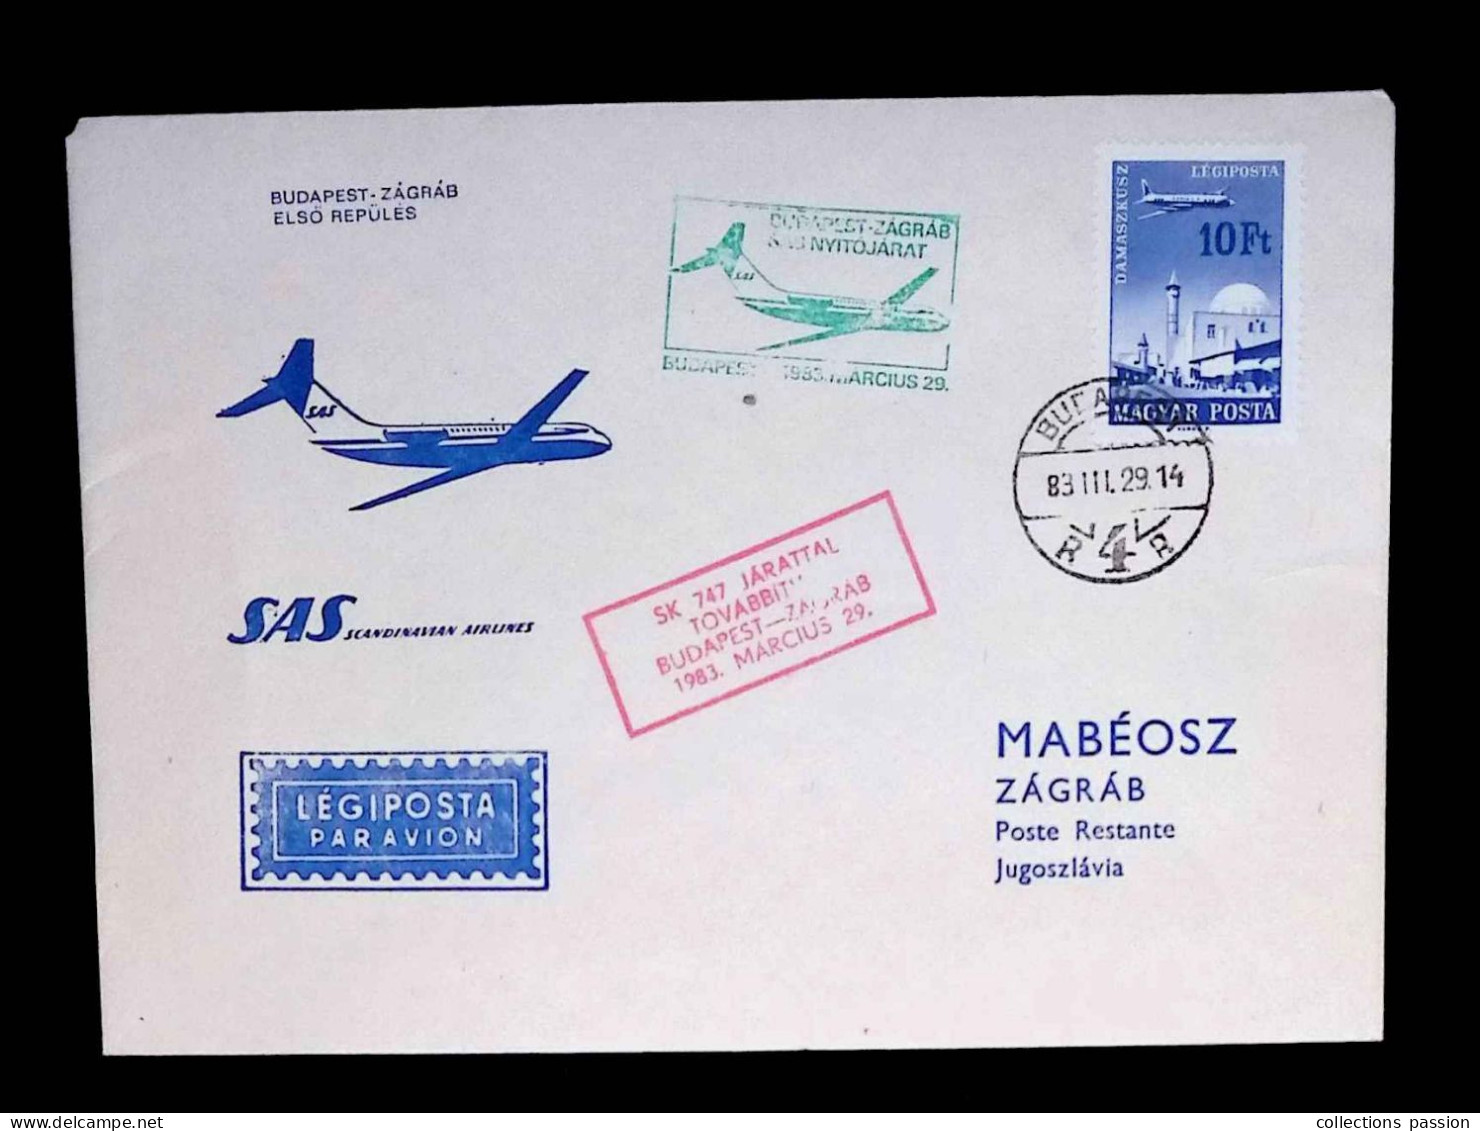 CL, Lettre, Hongrie, Budapest, R 4 R, 1983, SAS Scandinave Airlines, Zagreb, 2 Scans - Postmark Collection